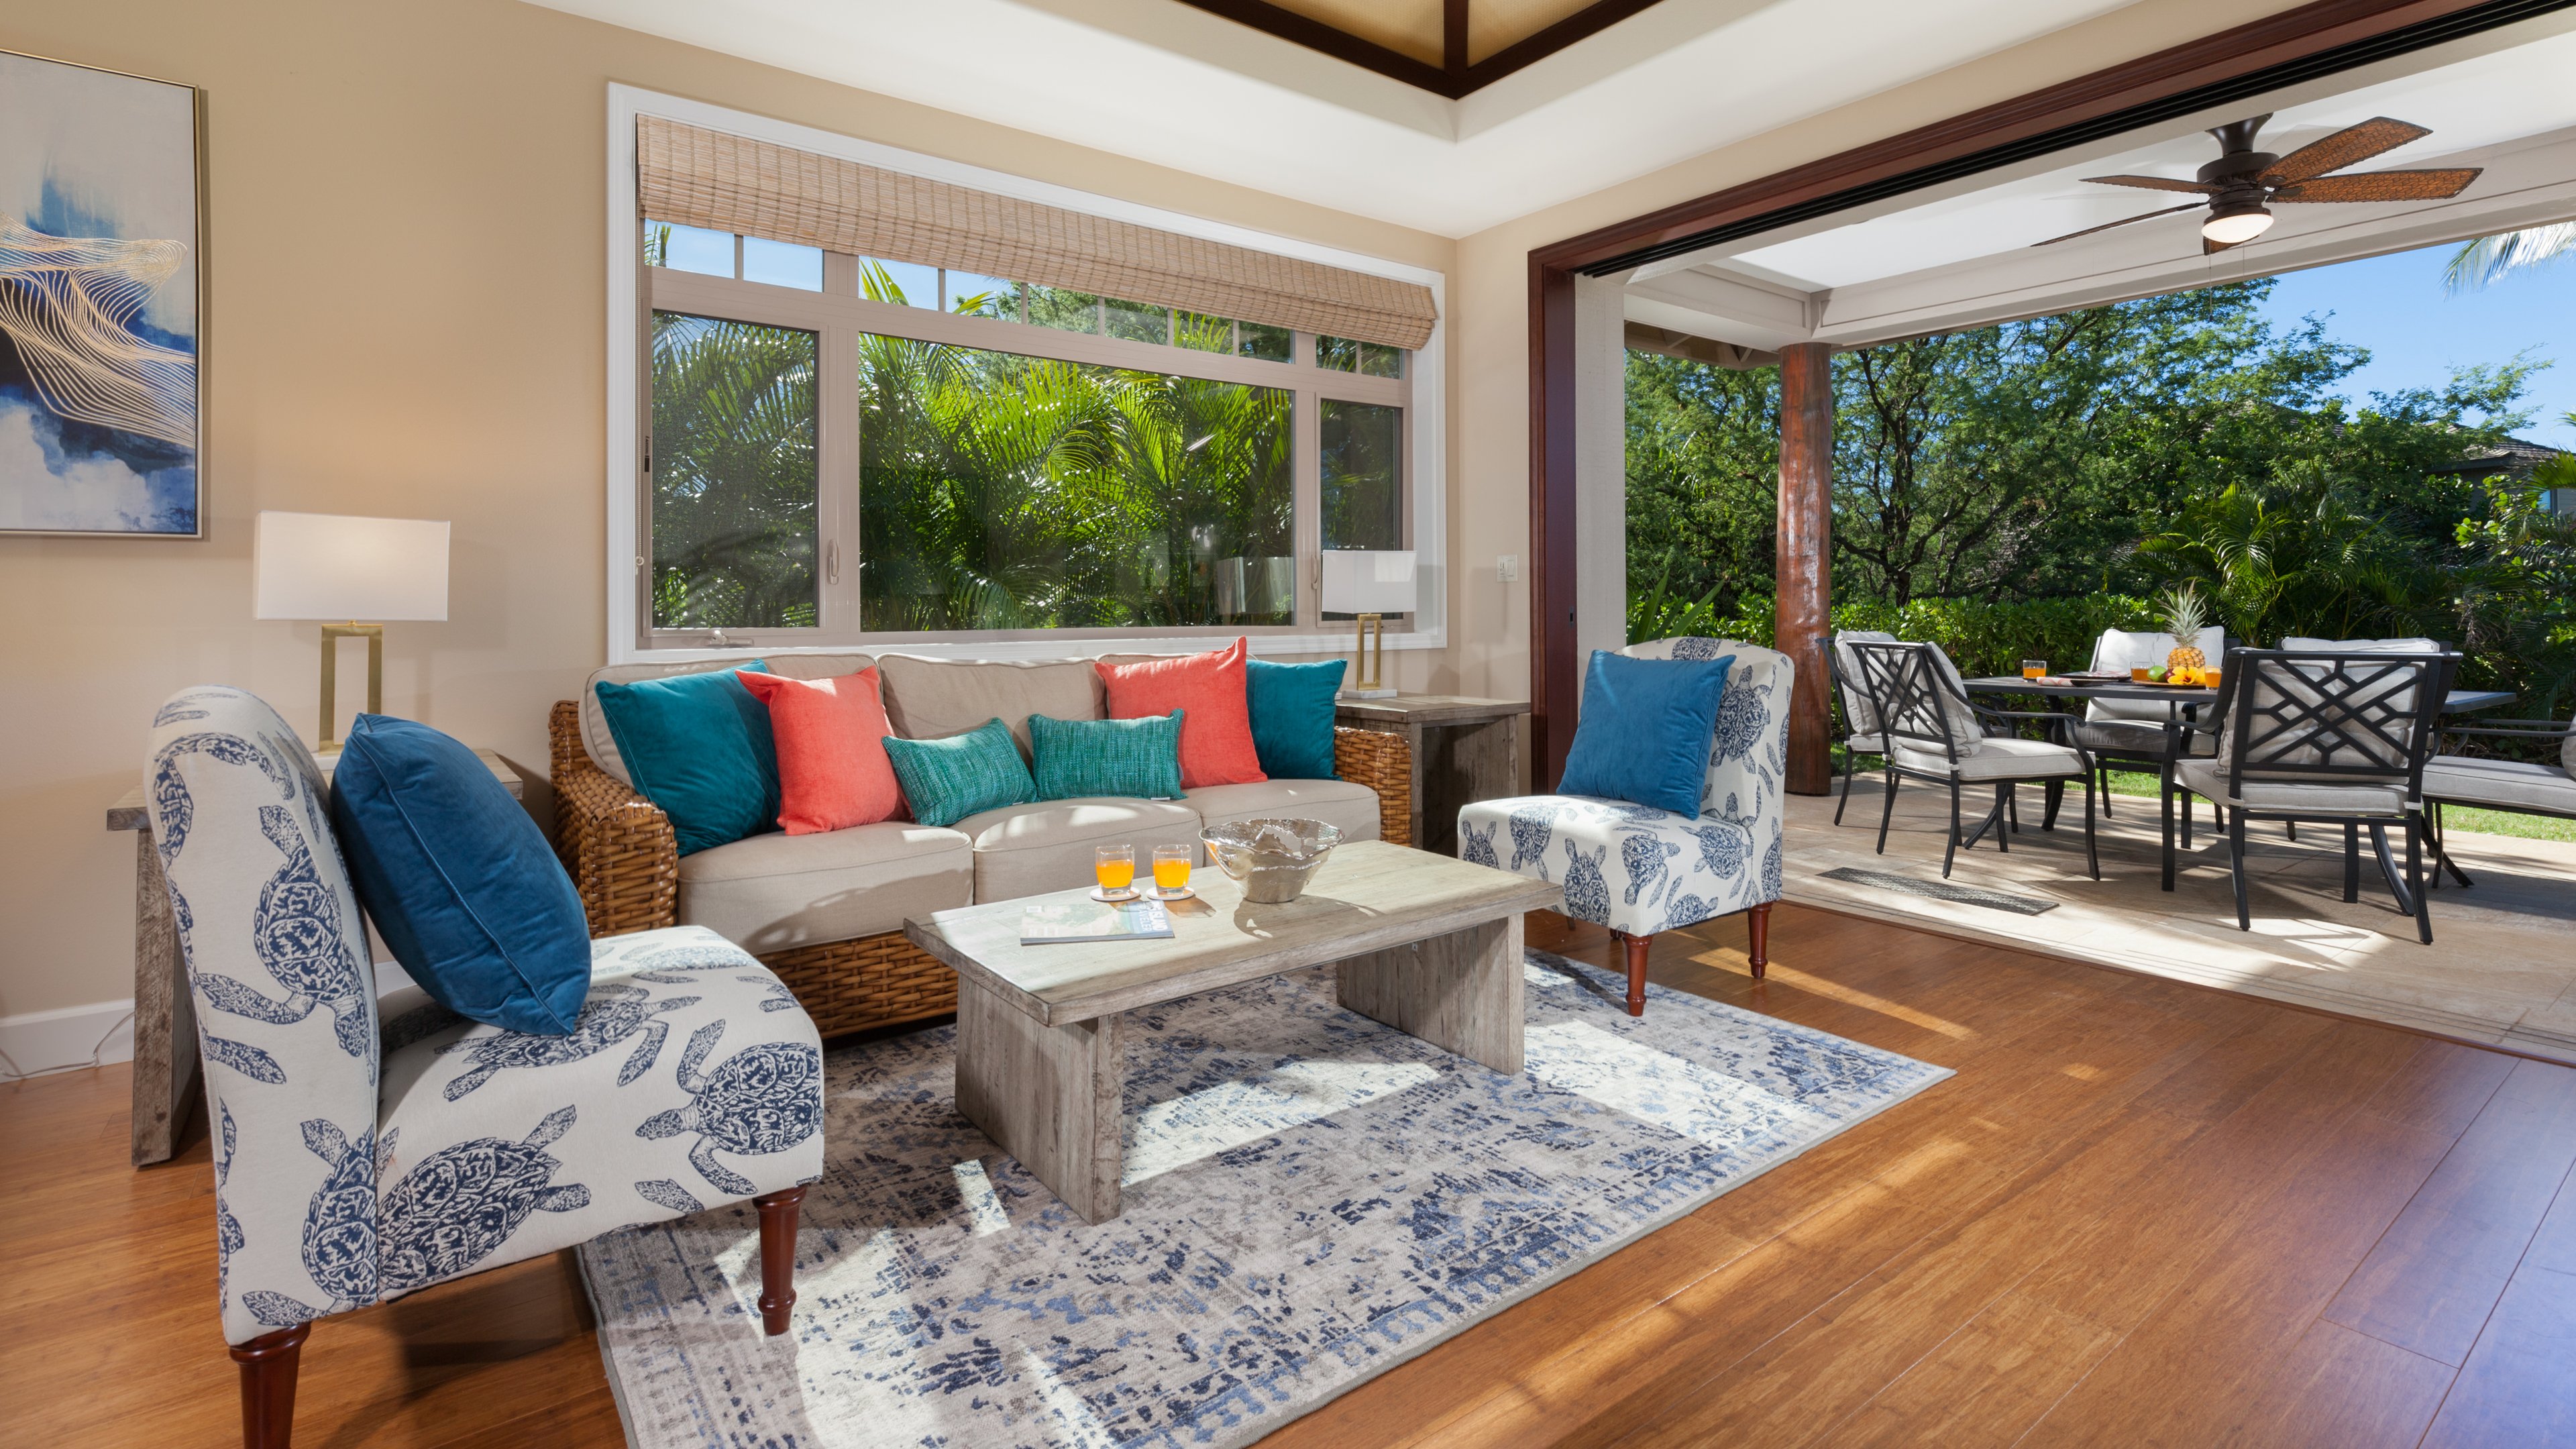 Welcome to Dolphin Hale in beautiful Kamilo gated community -- enjoy the covered lanai with large pocket doors that blend indoor and outdoor living